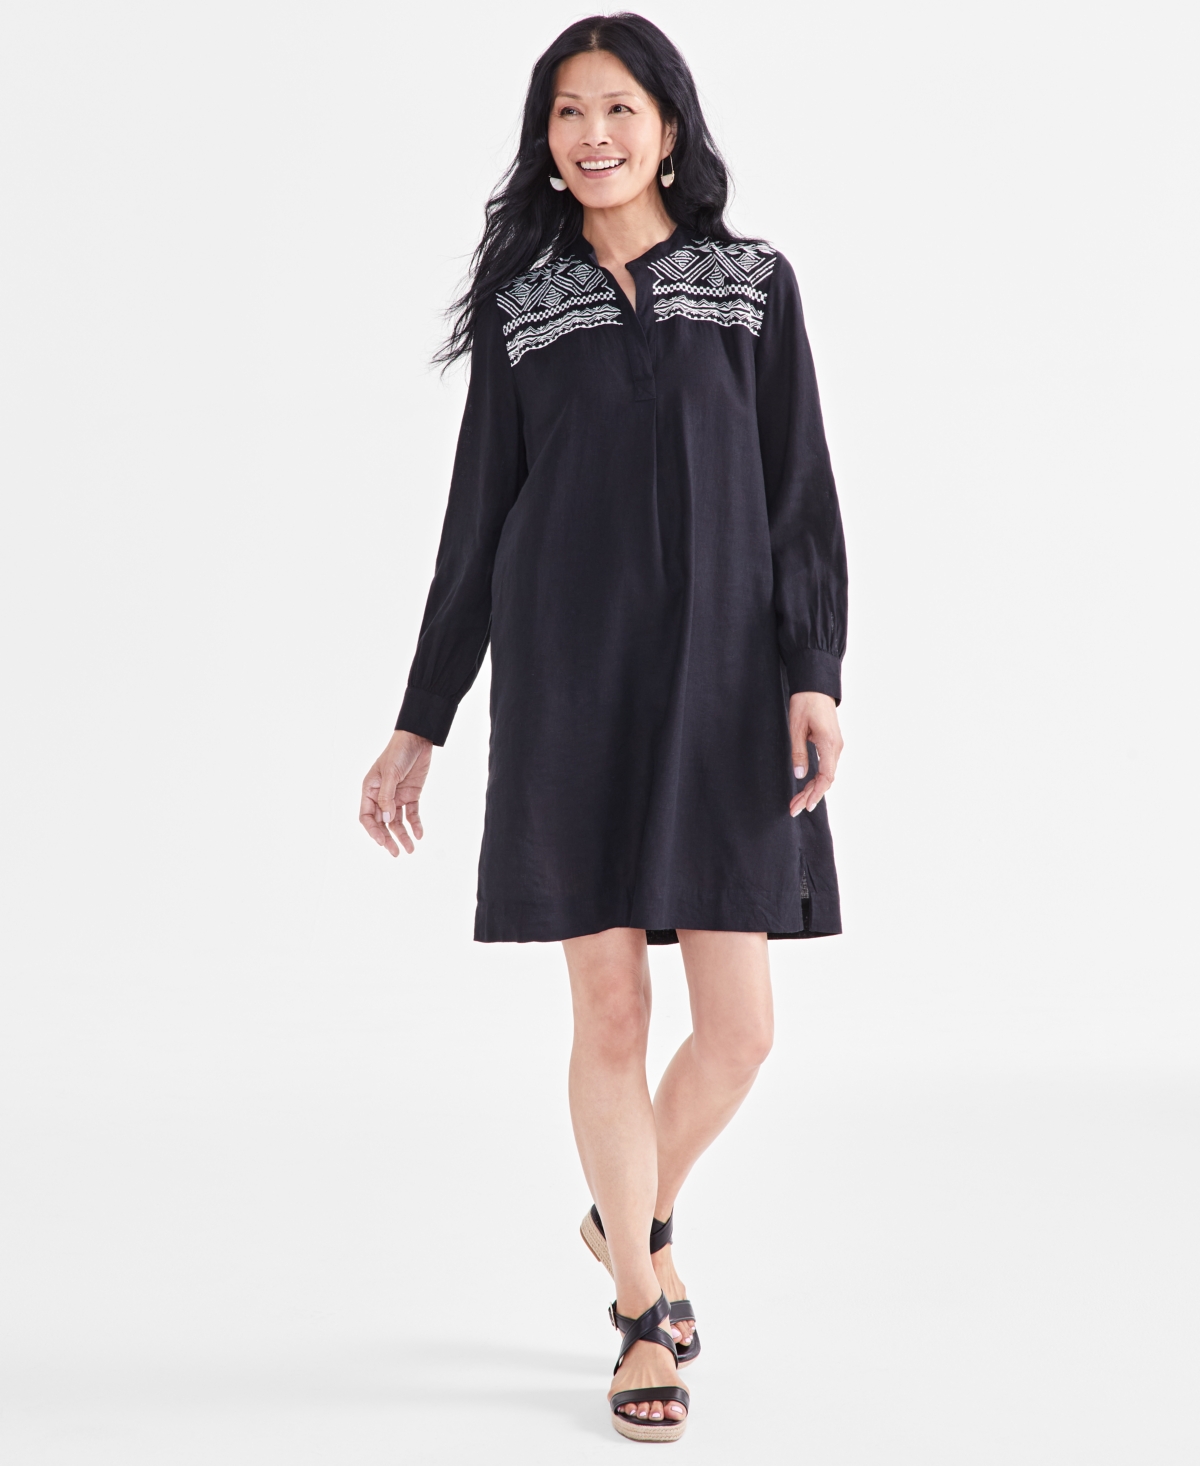 Women's Embroidered Pullover Long-Sleeve Dress, Created for Macy's - Black Embroidery